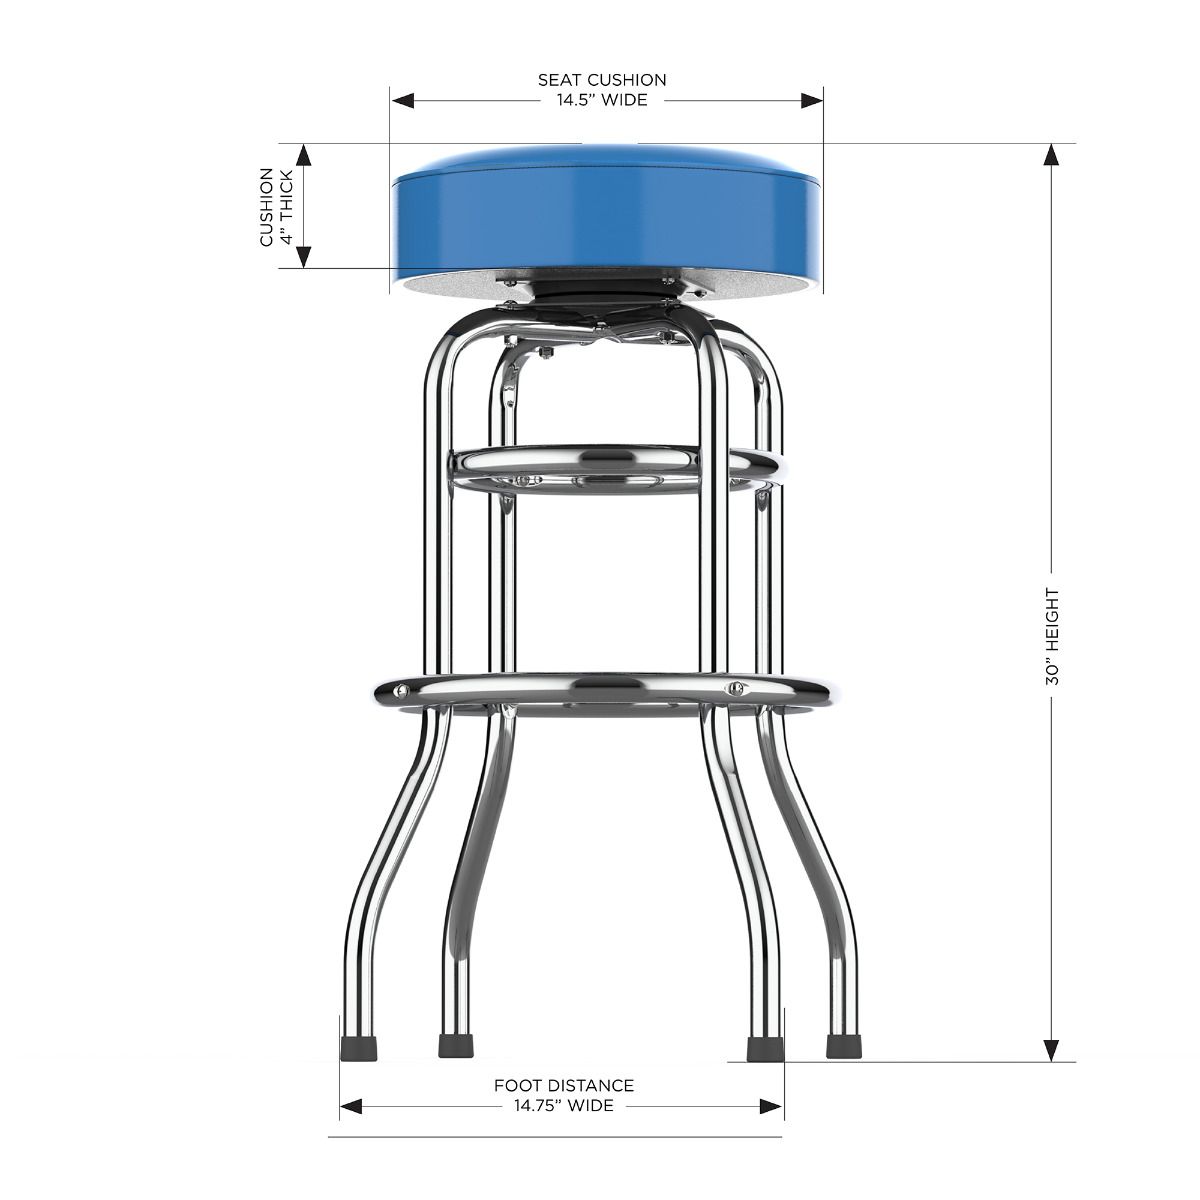 Imperial Los Angeles Chargers 30" Bar Stool